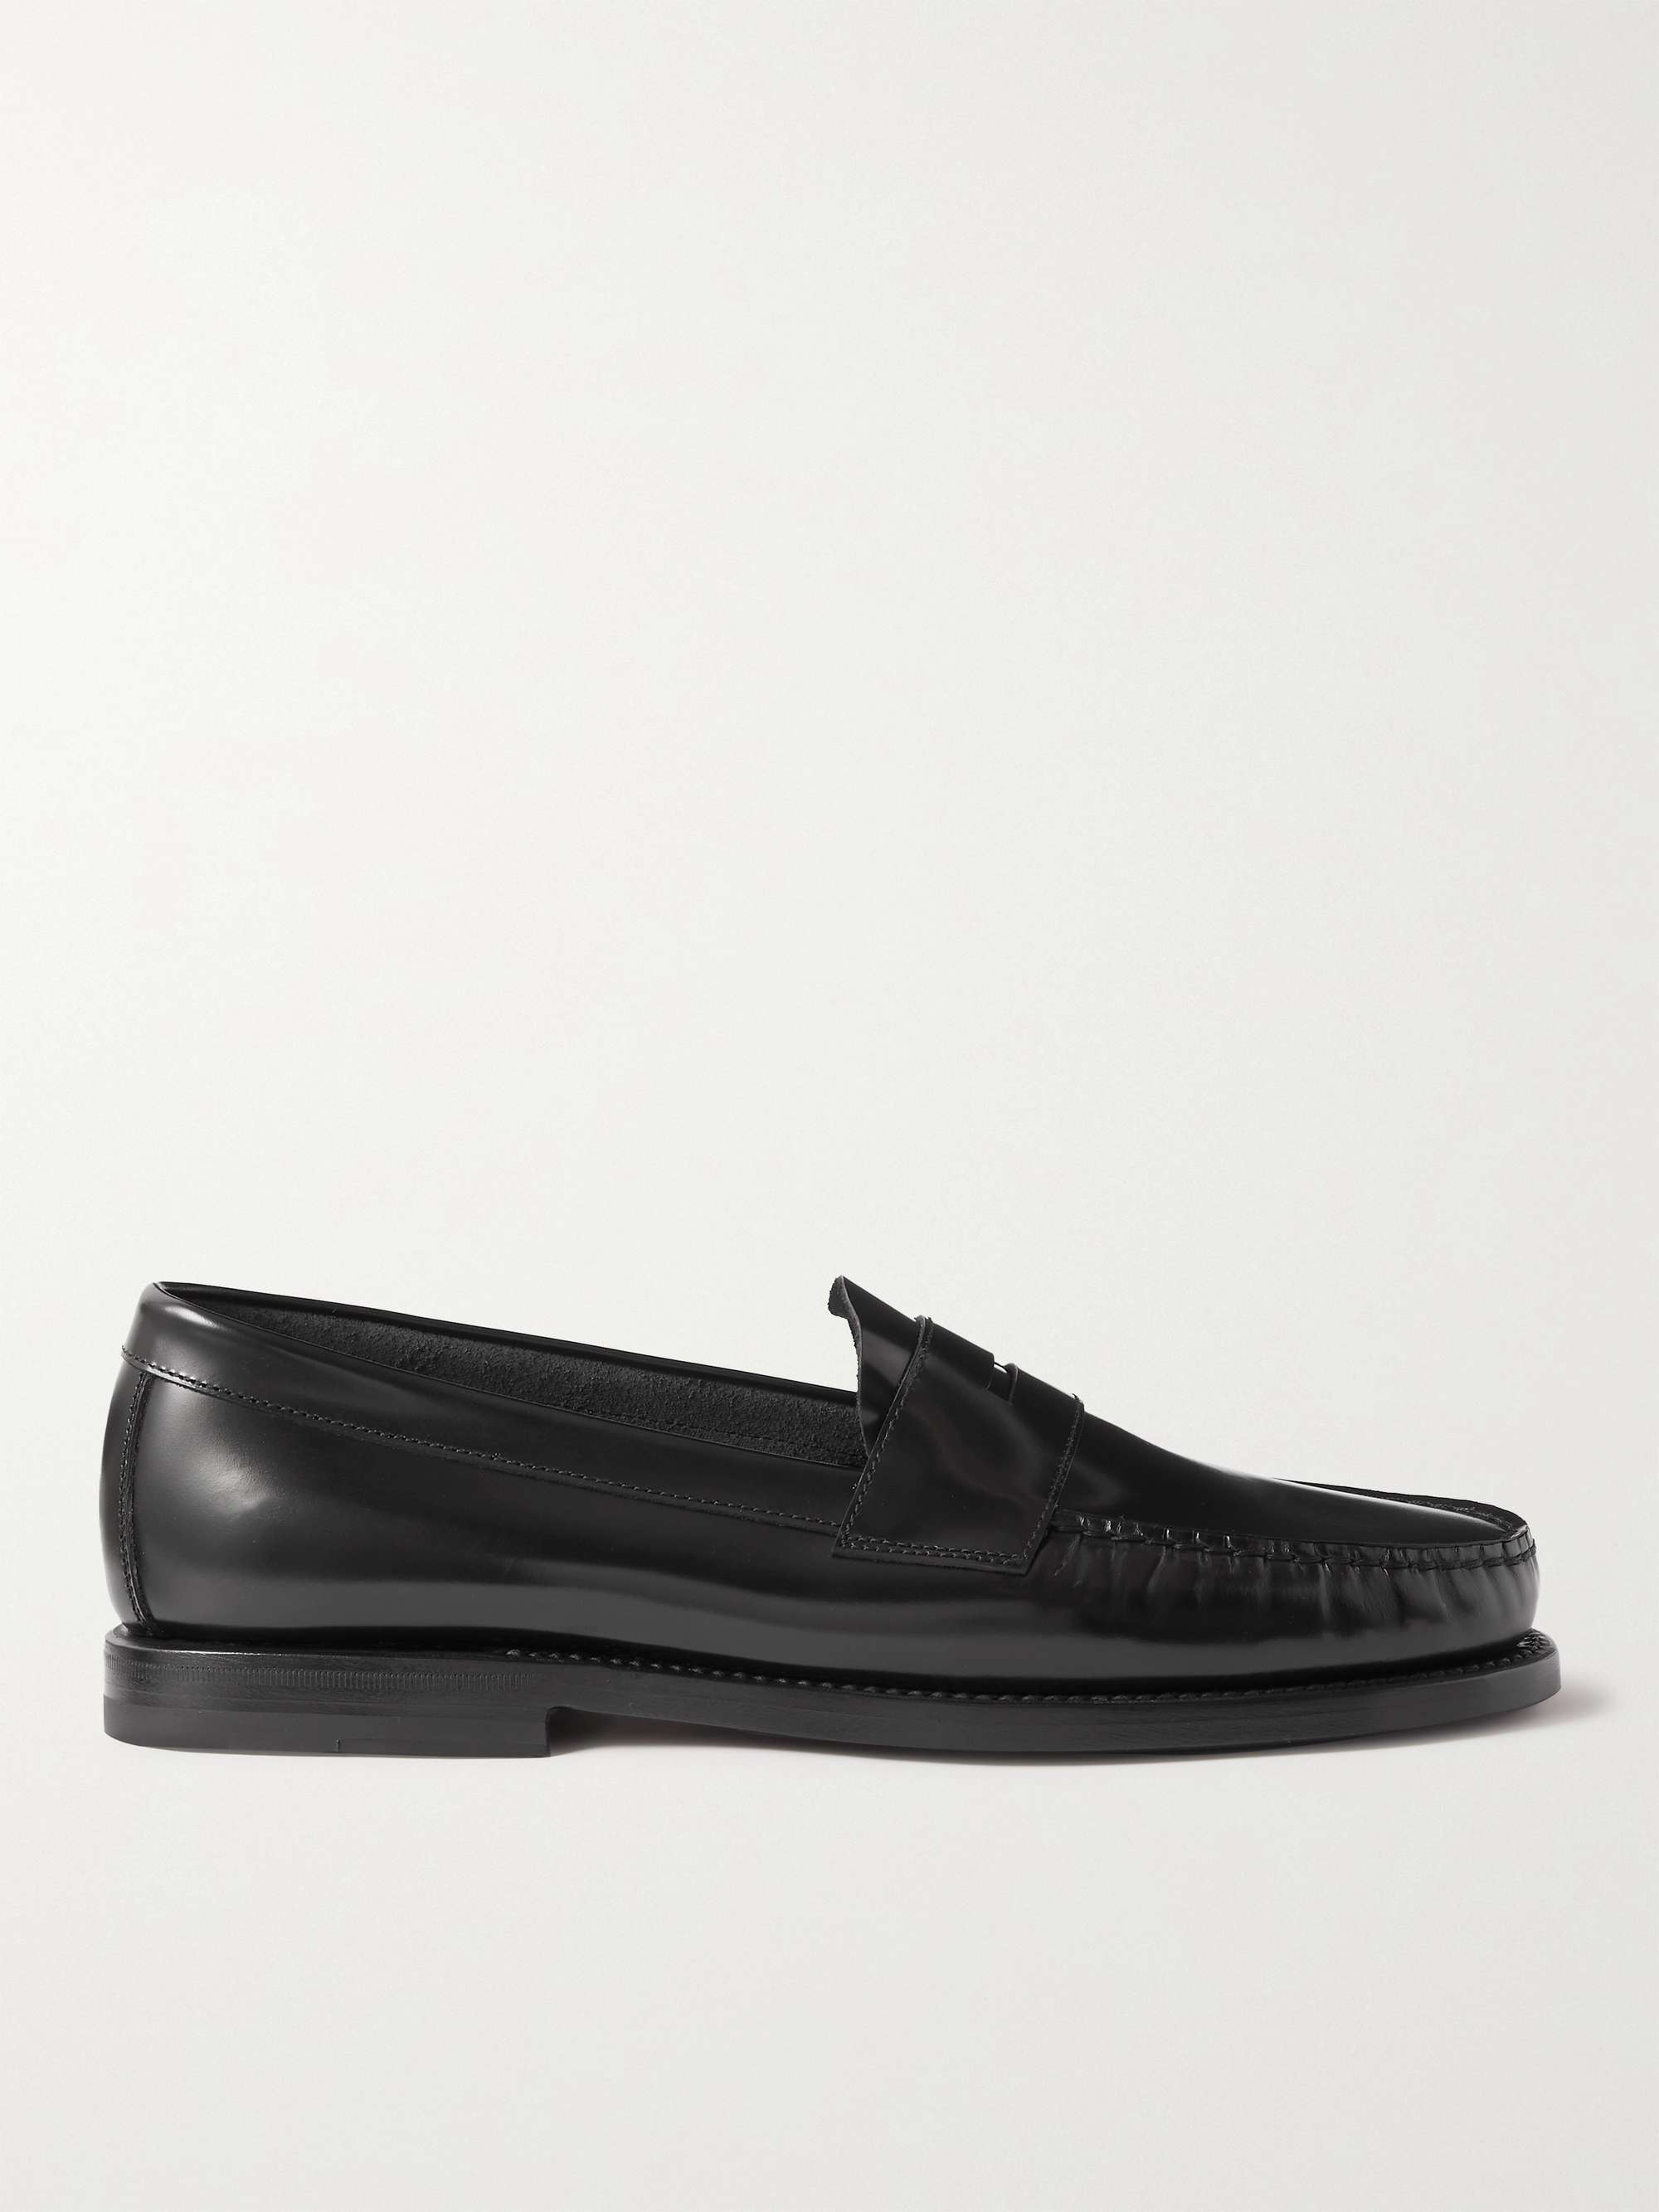 FEAR OF GOD Leather Penny Loafers